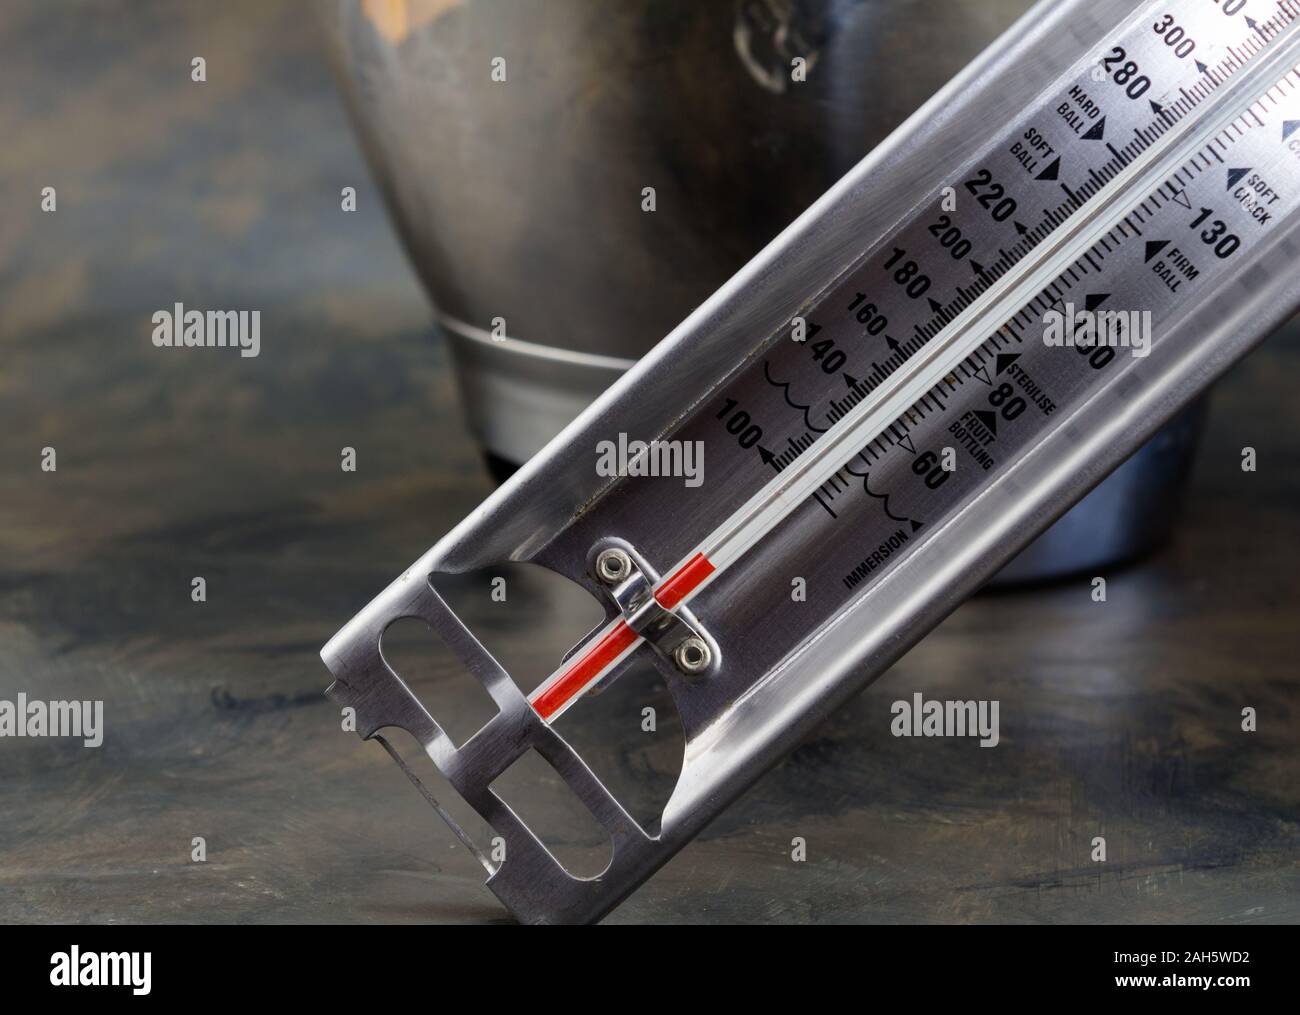 https://c8.alamy.com/comp/2AH5WD2/candy-thermometer-in-front-of-stainless-steel-mixing-bowl-on-grey-mottled-kitchen-surface-with-space-for-text-on-the-side-of-photo-2AH5WD2.jpg